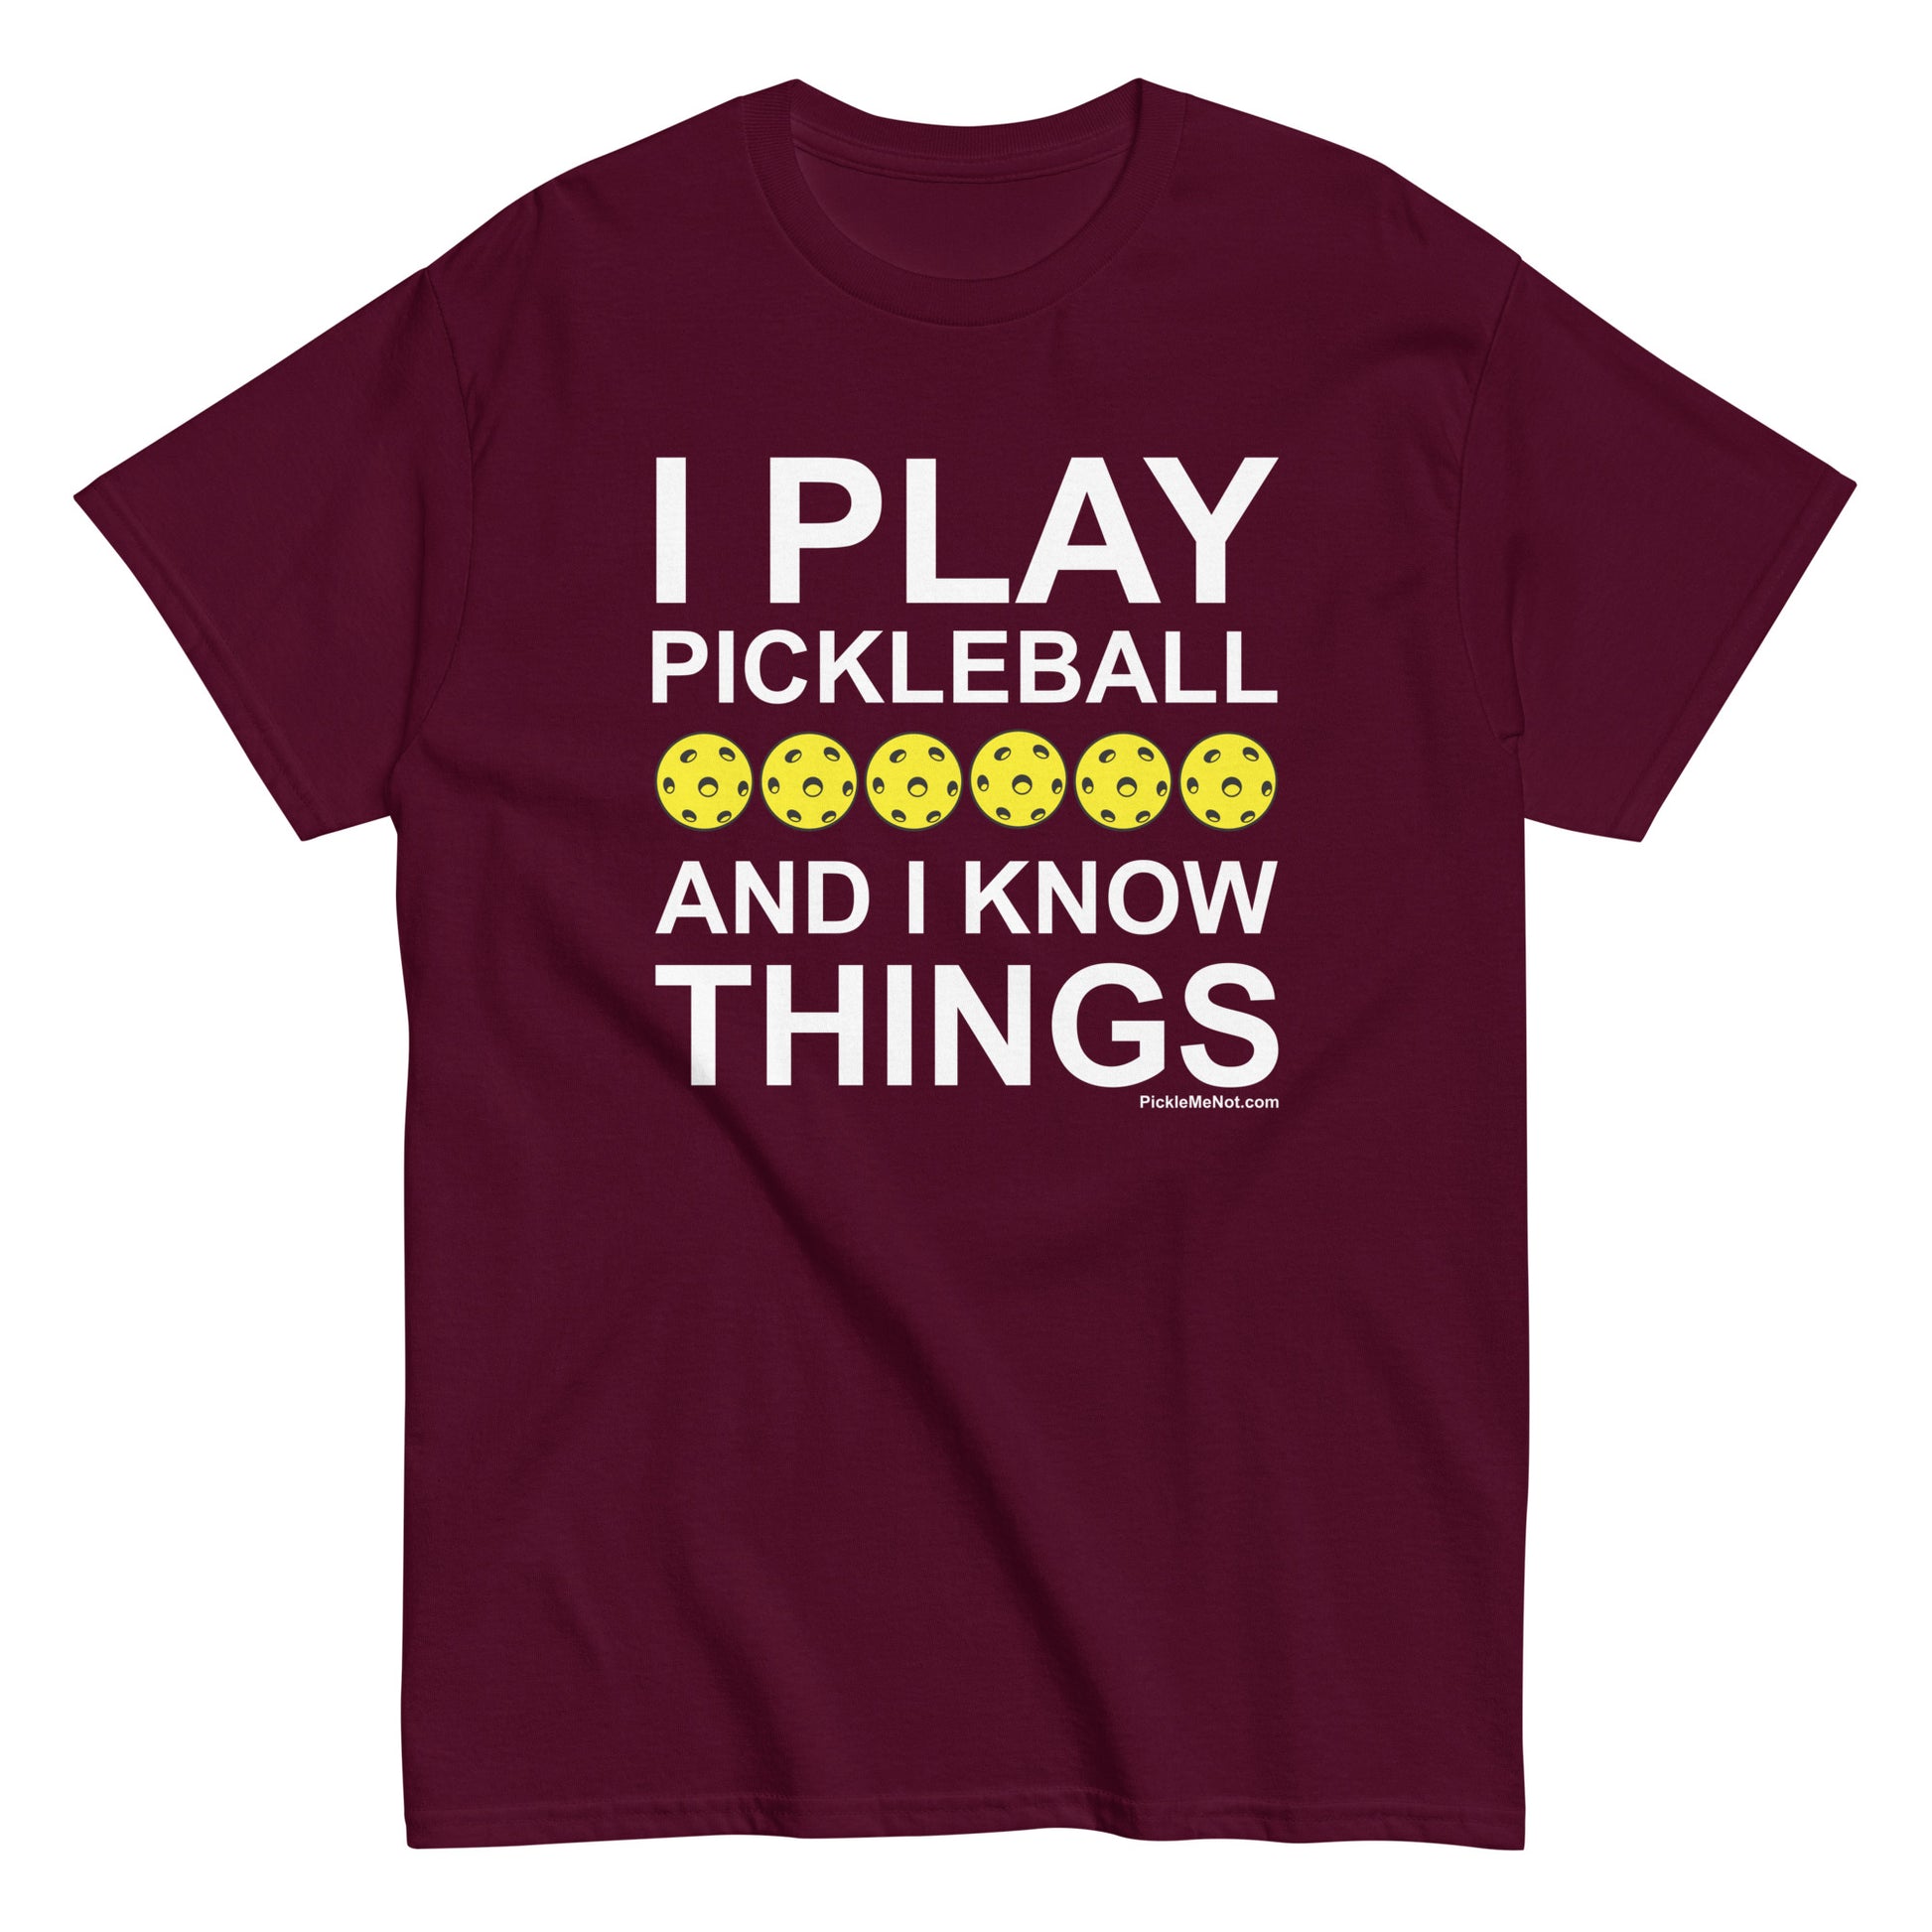 Fun Pickleball, "I Play Pickleball And I Know Things" Men's Classic Maroon Tee